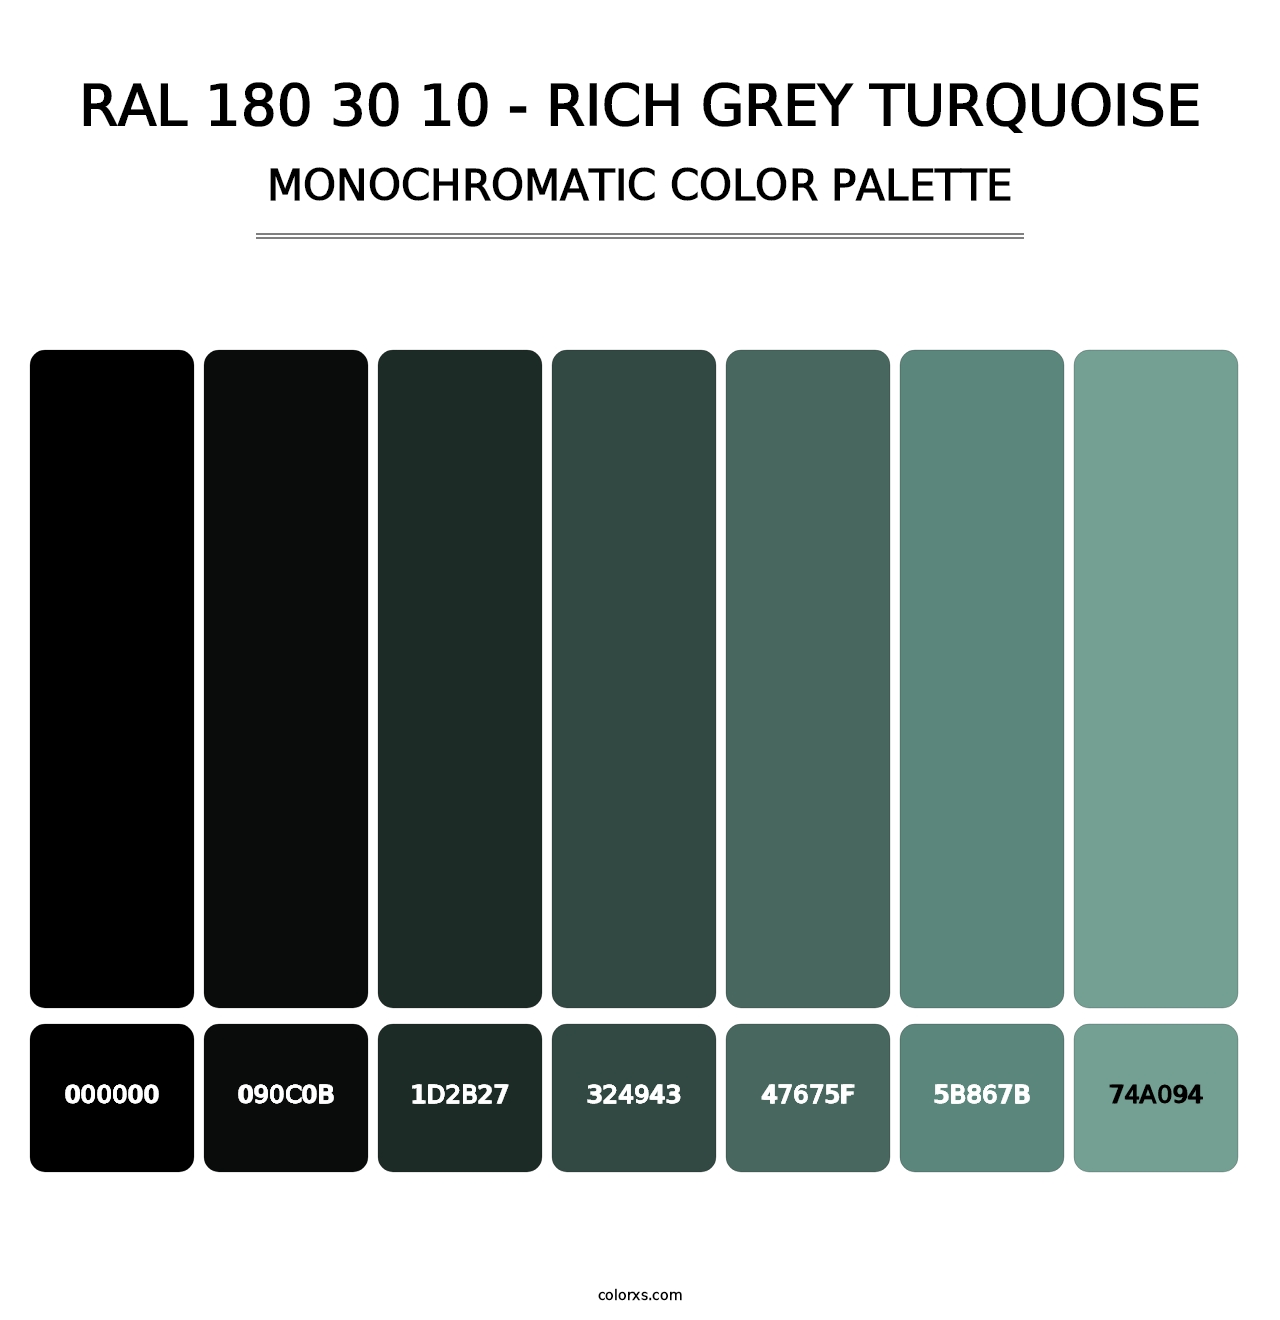 RAL 180 30 10 - Rich Grey Turquoise - Monochromatic Color Palette